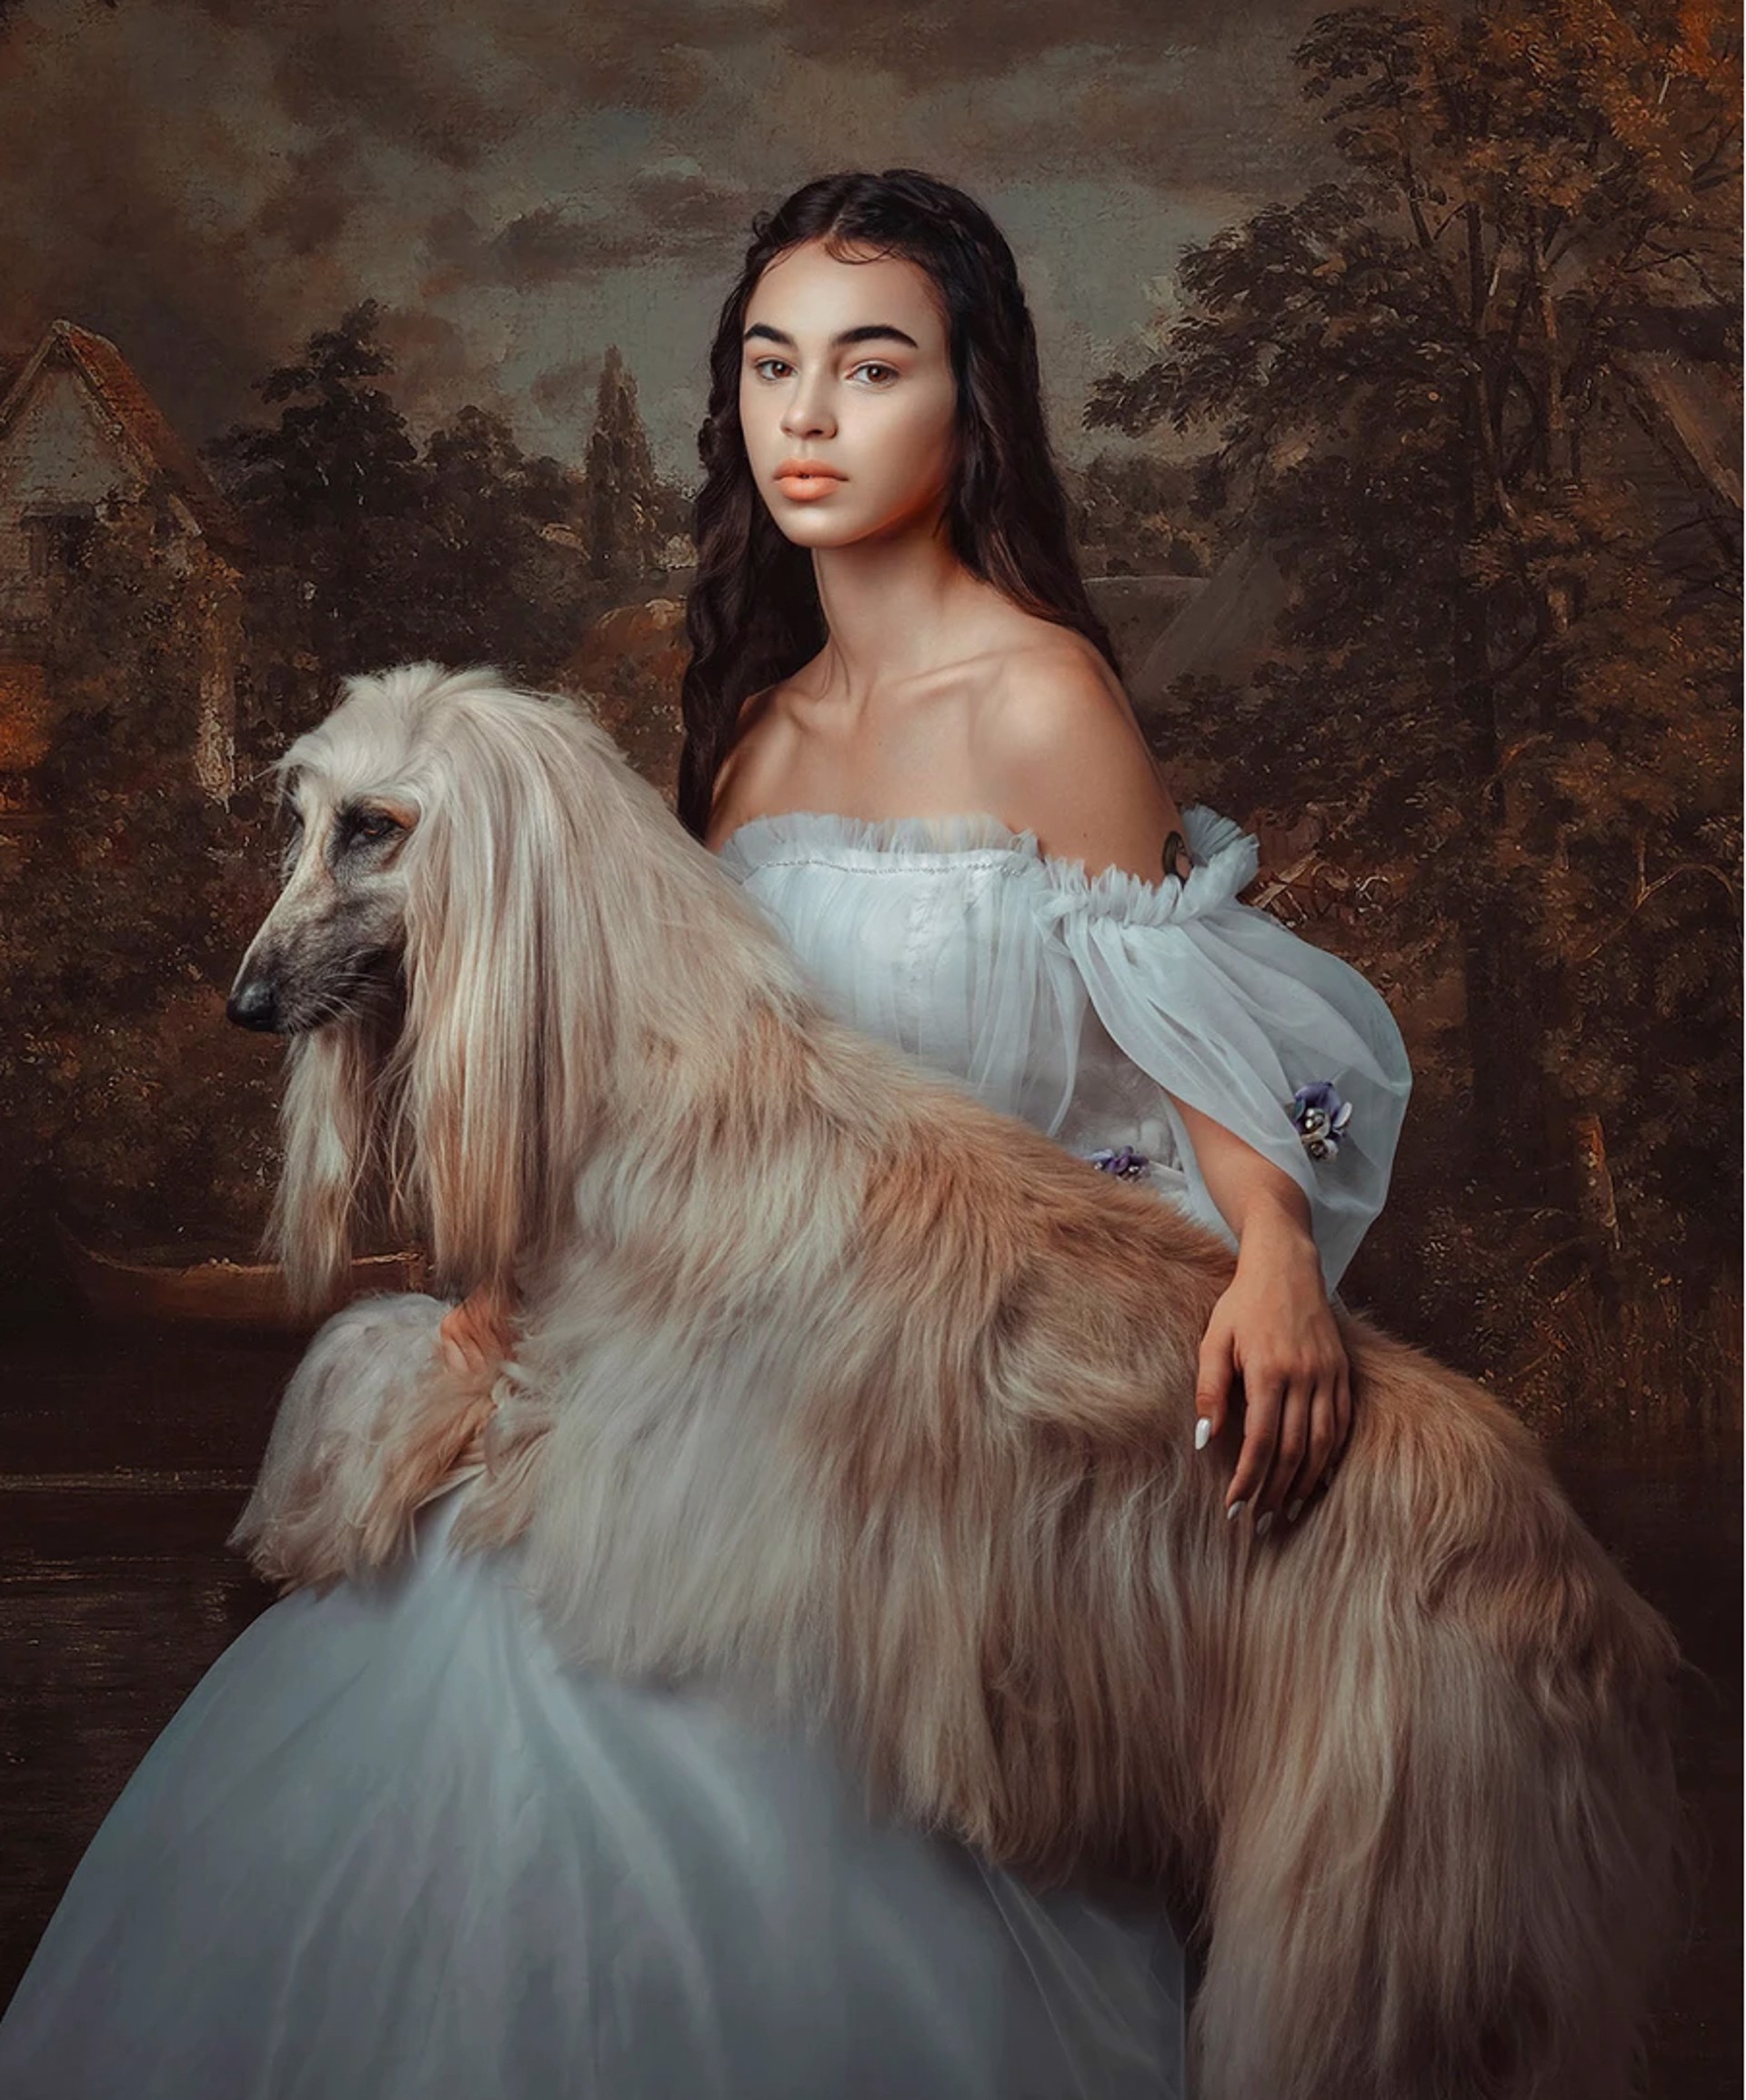 The Lady with the Dog by Carlos Gamez de Francisco